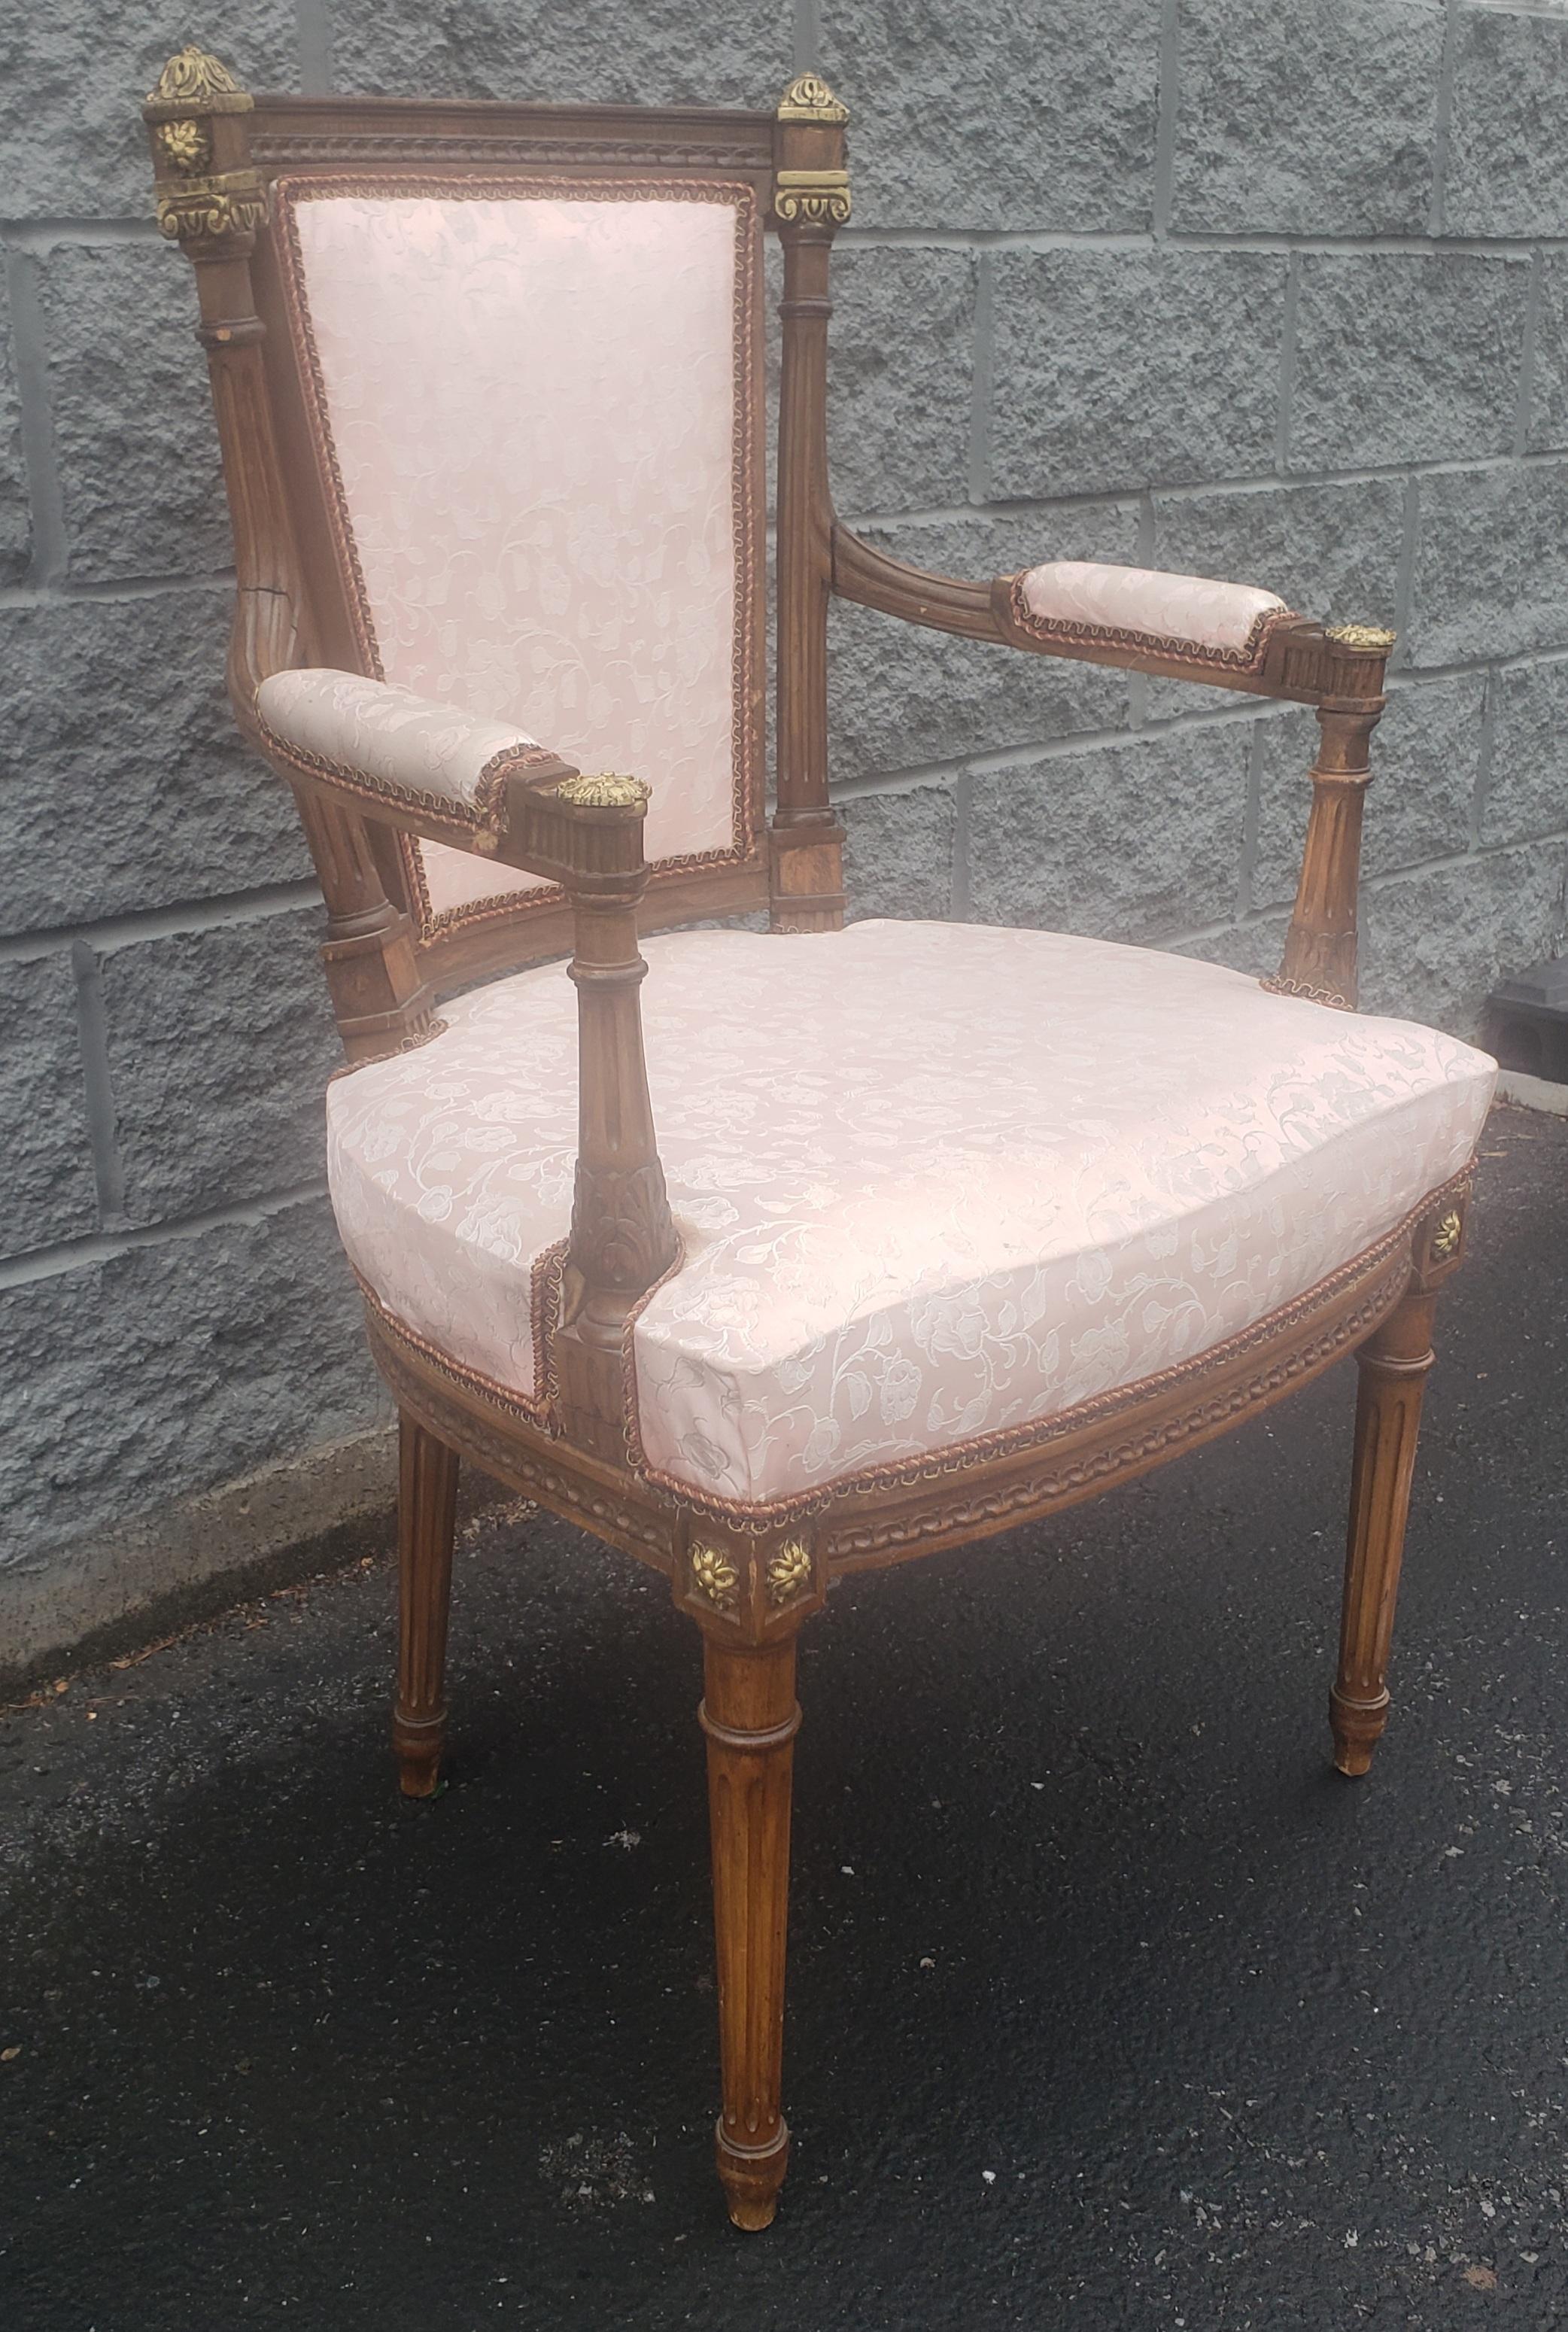 An early 20th century Louis XV mahogany and giltwood upholstered armchair in good condition with rose color upholstery. Chair measures 23